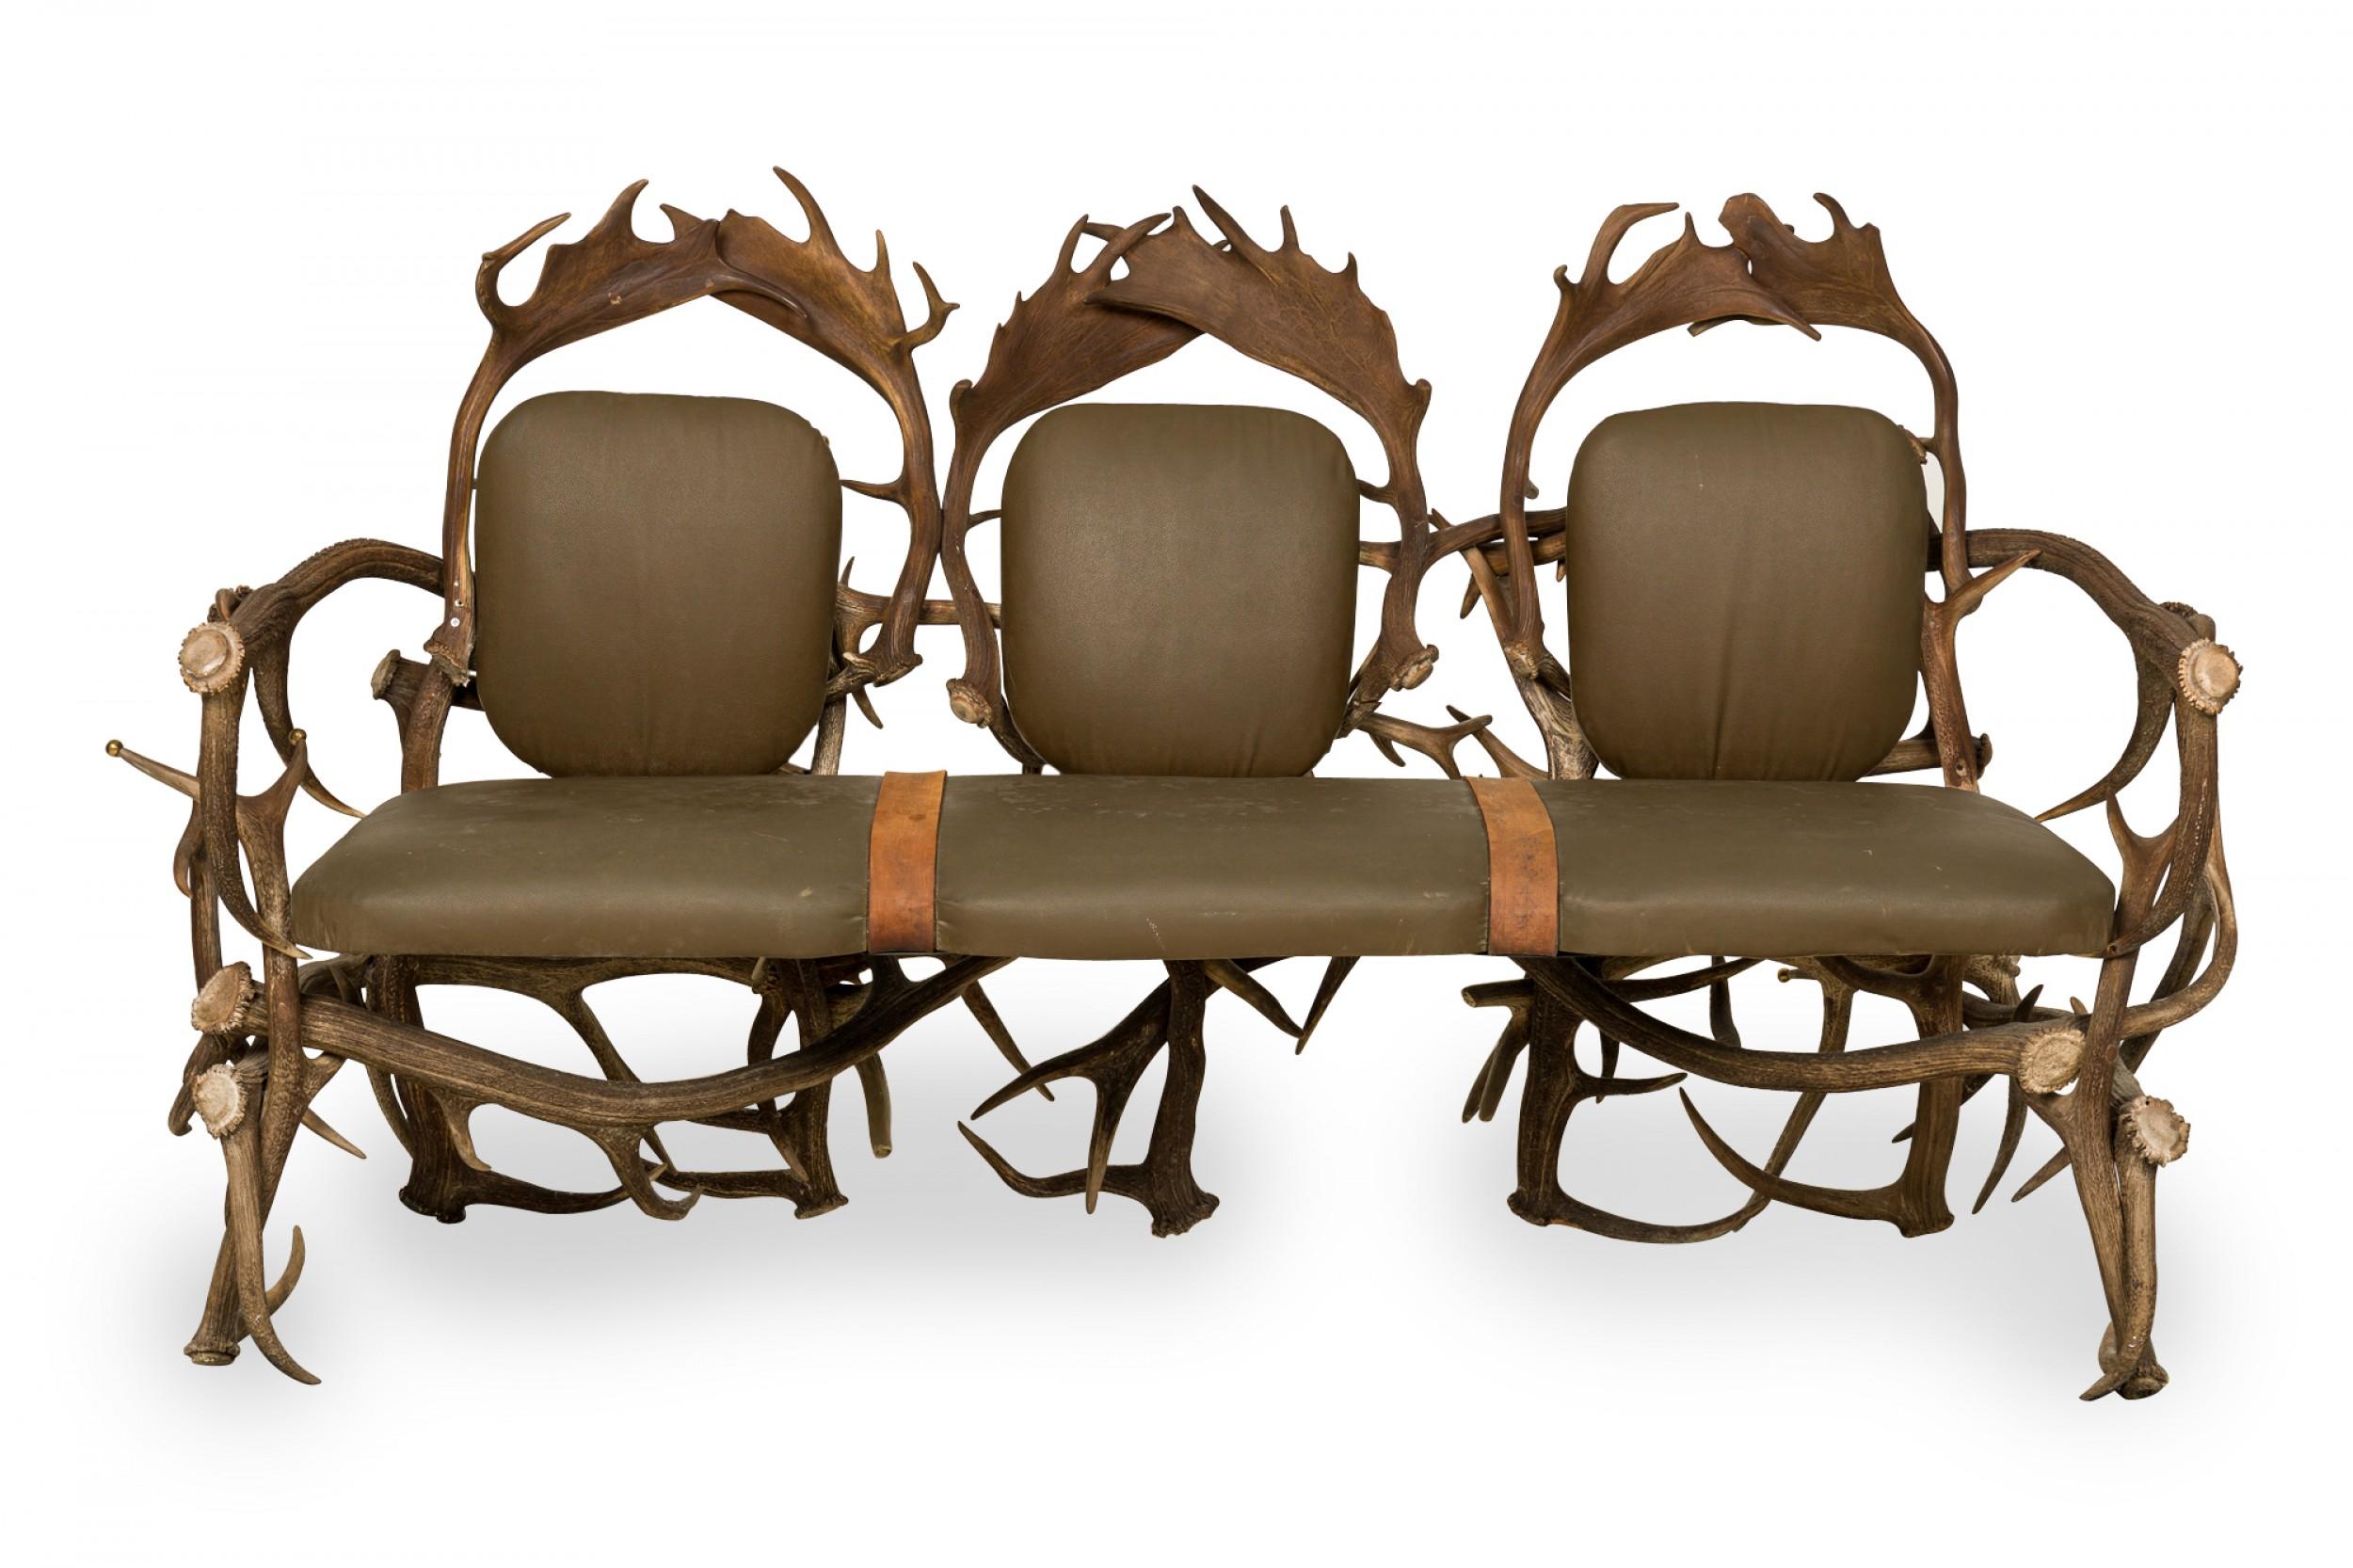 Rustic Continental-style three seat settee with dark olive green leather upholstered seat and backs with two decorative brown suede straps in a frame built from resin faux moose and deer antlers, some of which are capped with decorative brass balls.